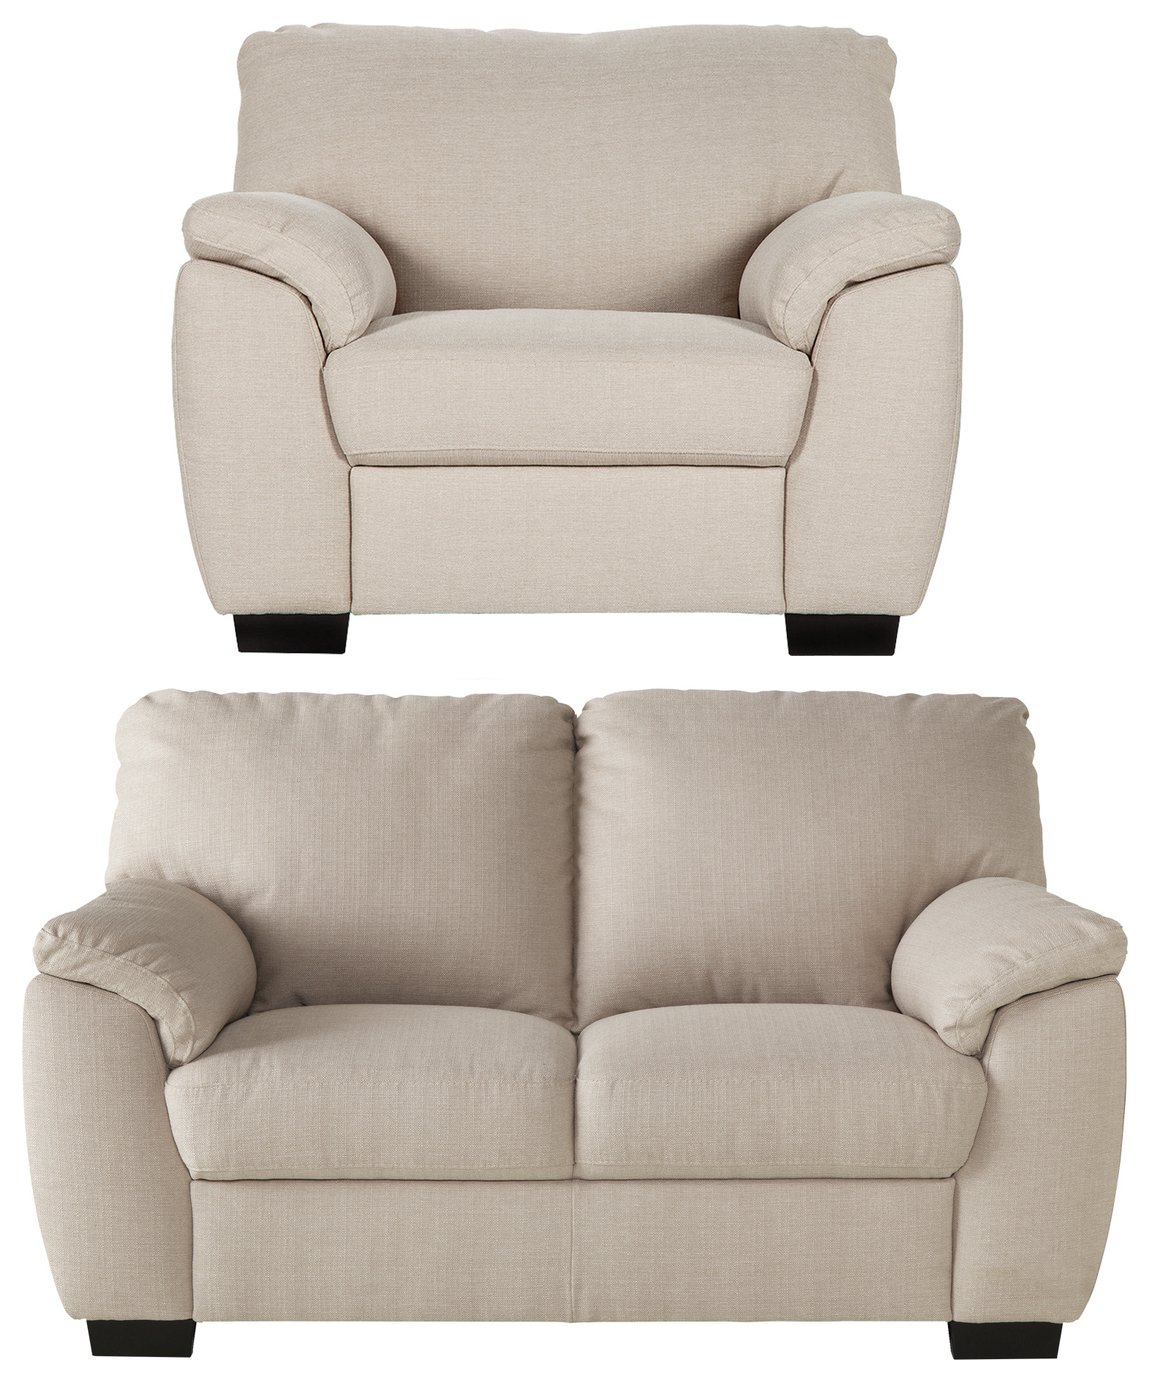 Argos Home Milano Fabric Chair and 2 Seater Sofa - Beige